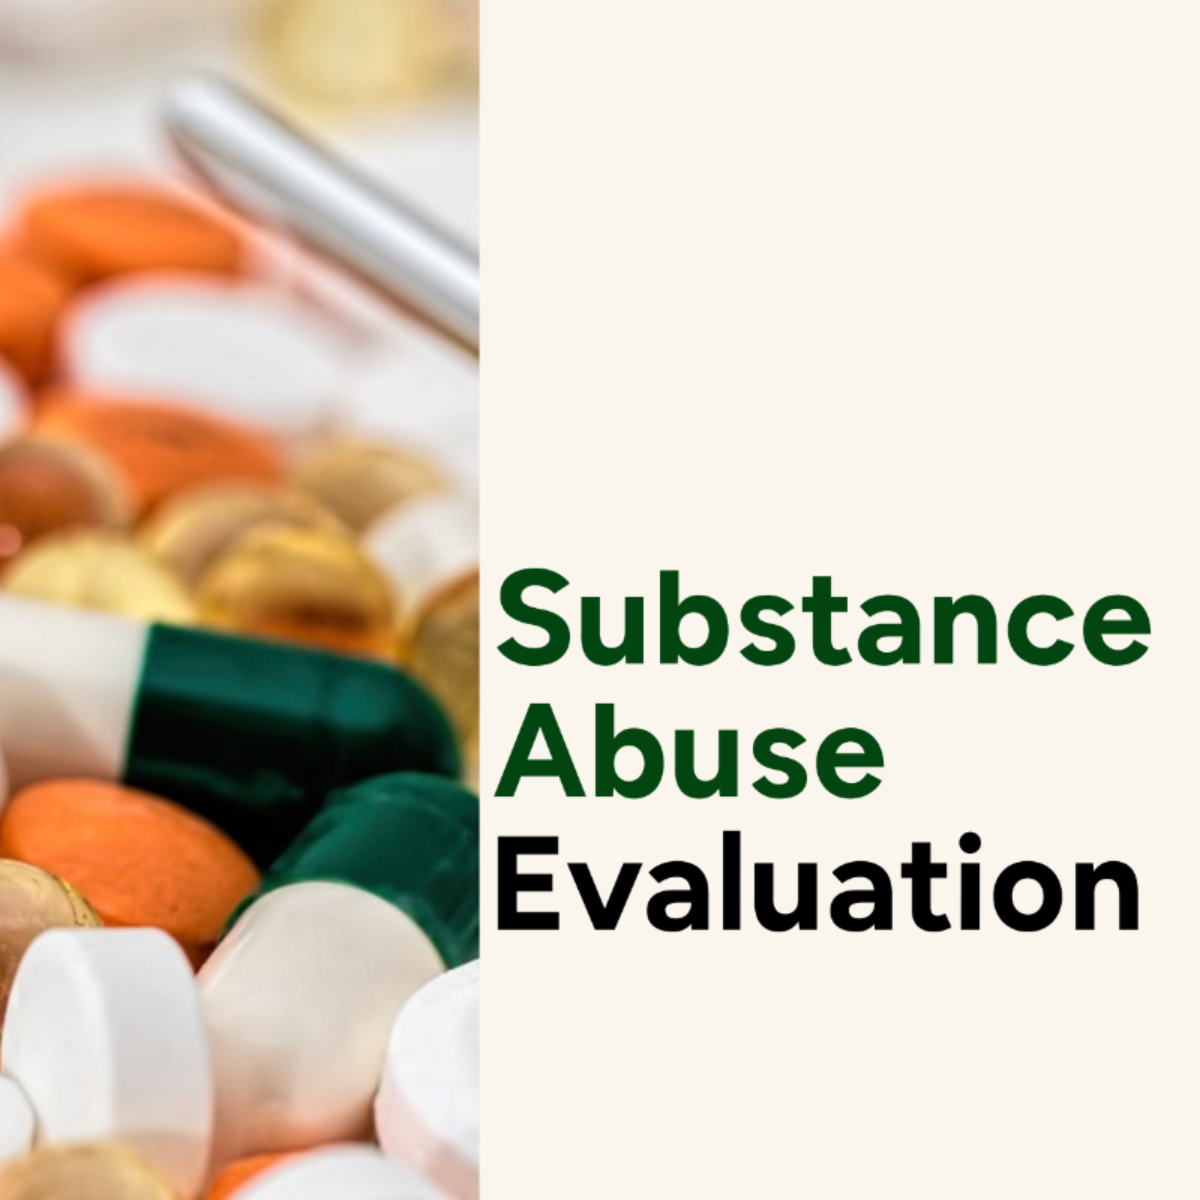 Substance Abuse Evaluation Template